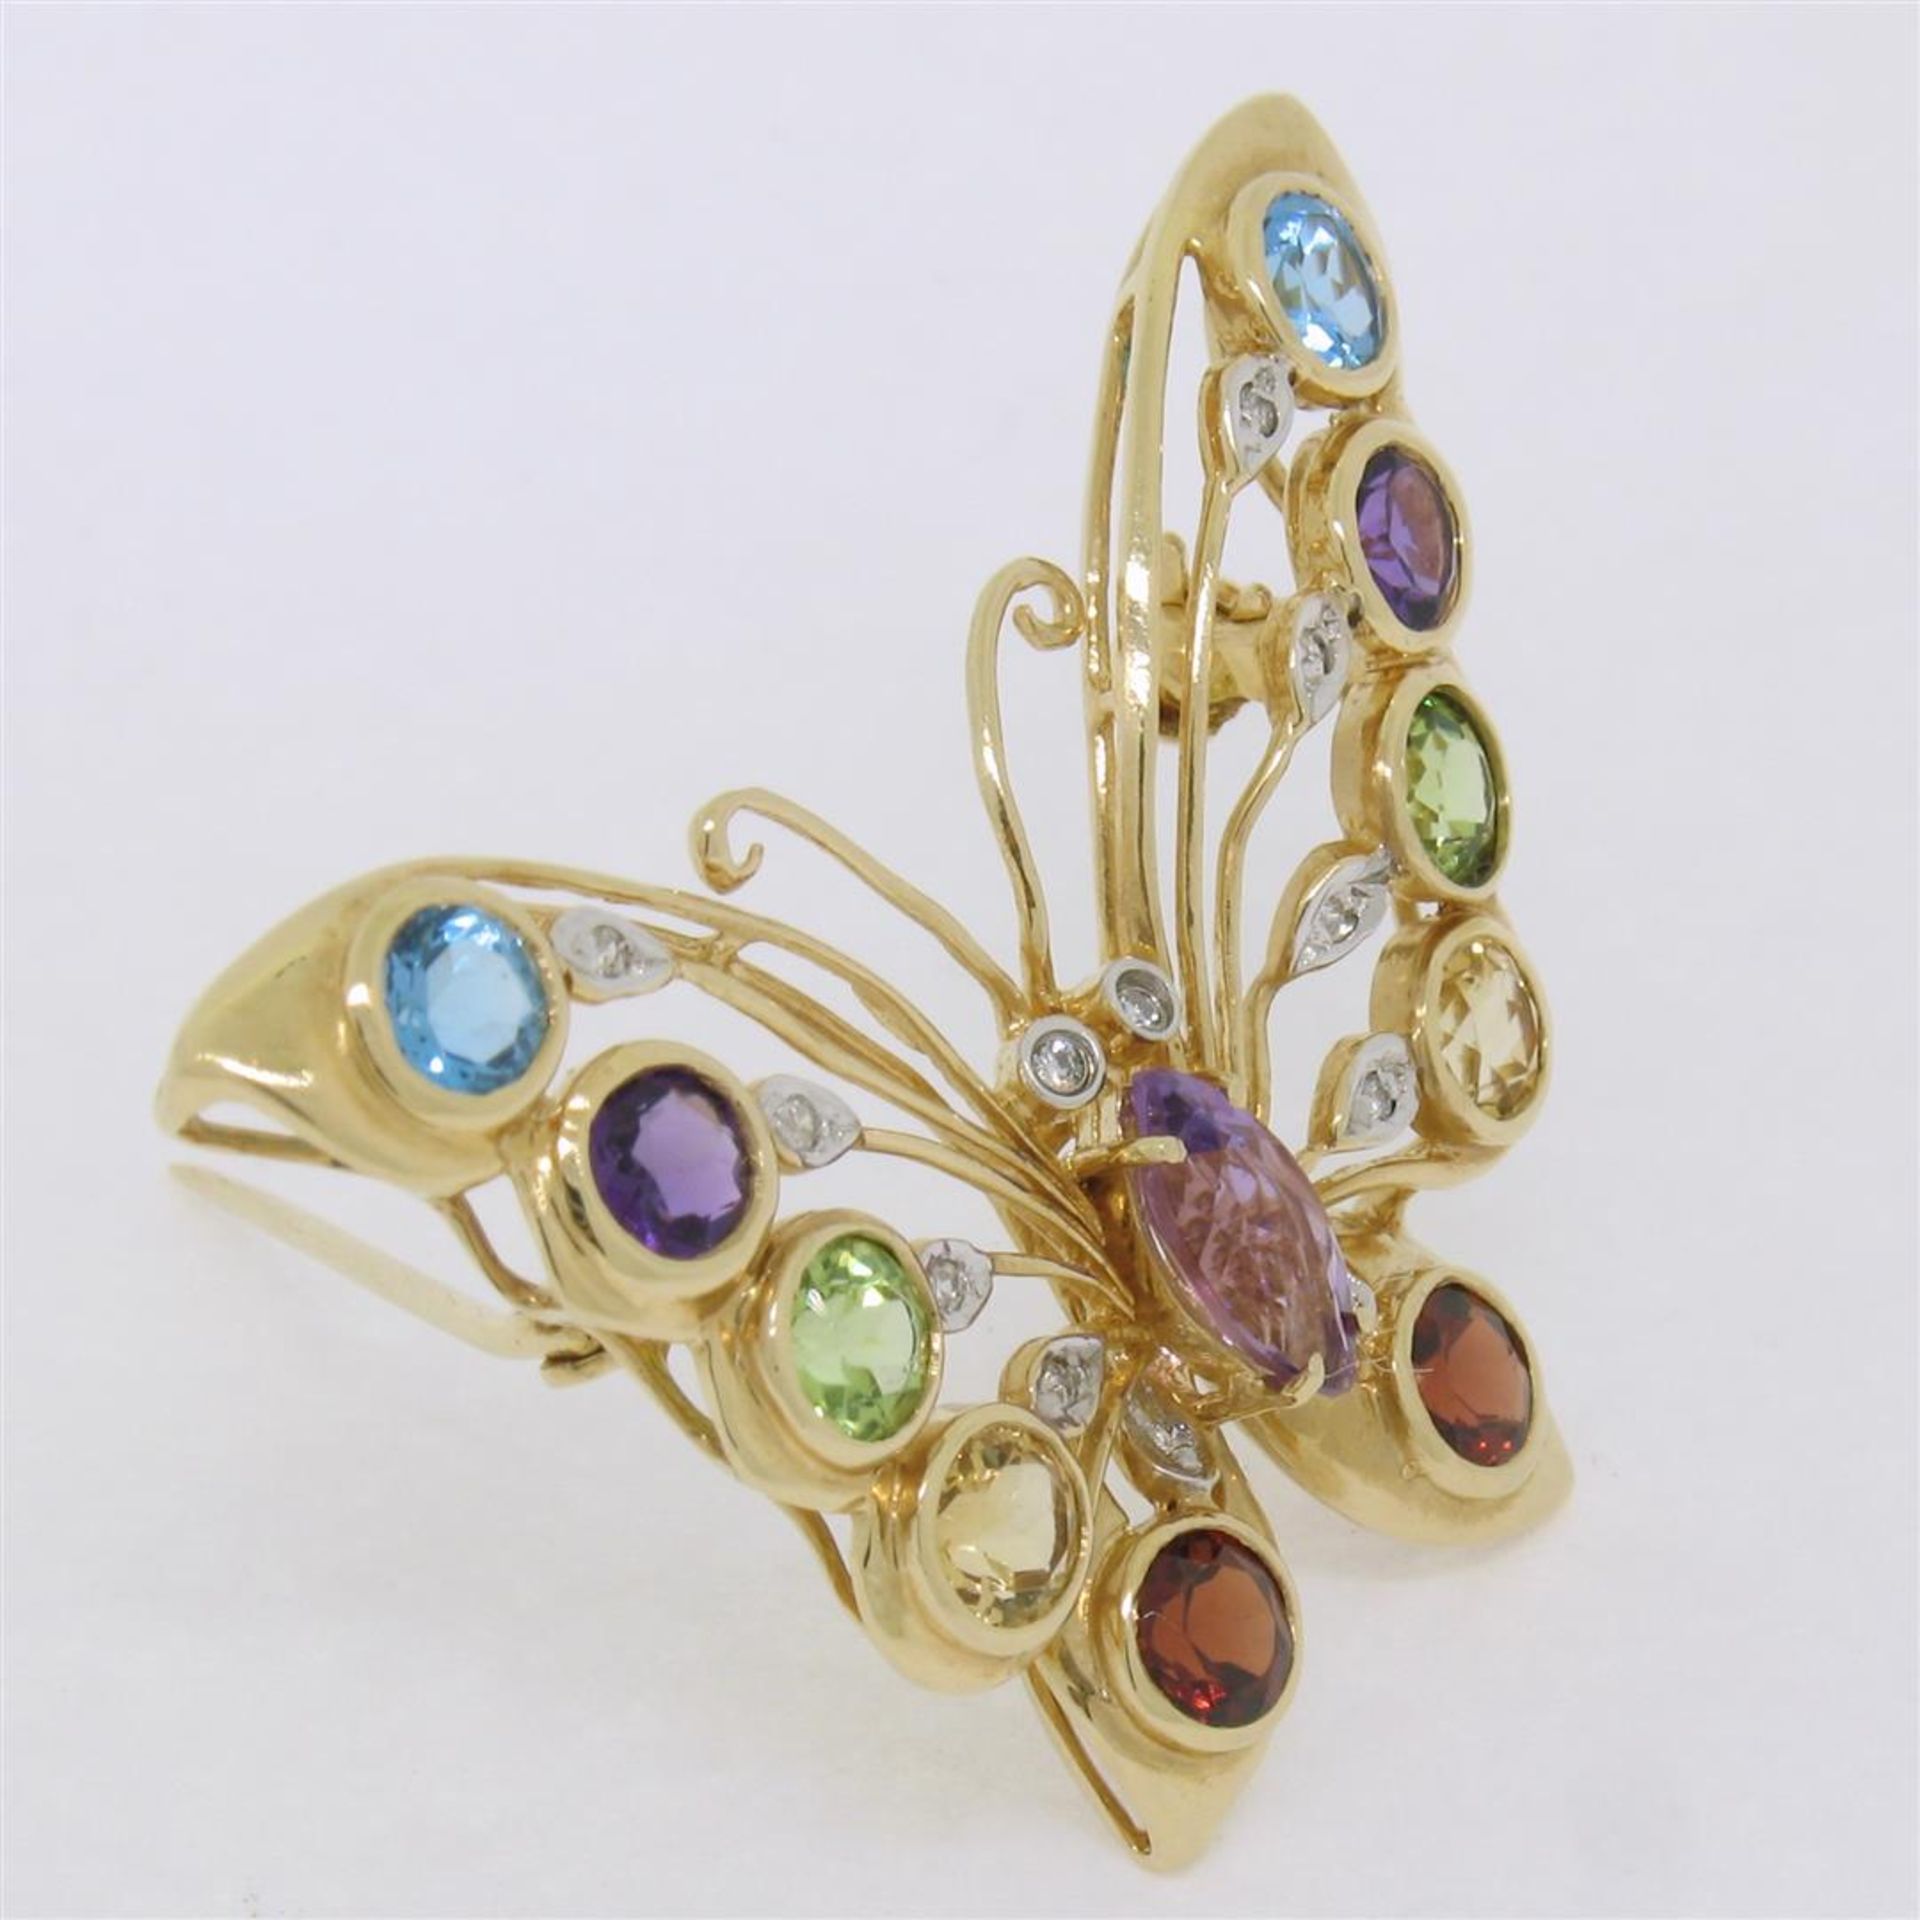 14k Yellow Gold 3.12ct Multi Colored Natural Gemstone & Diamond Butterfly Brooch - Image 4 of 7